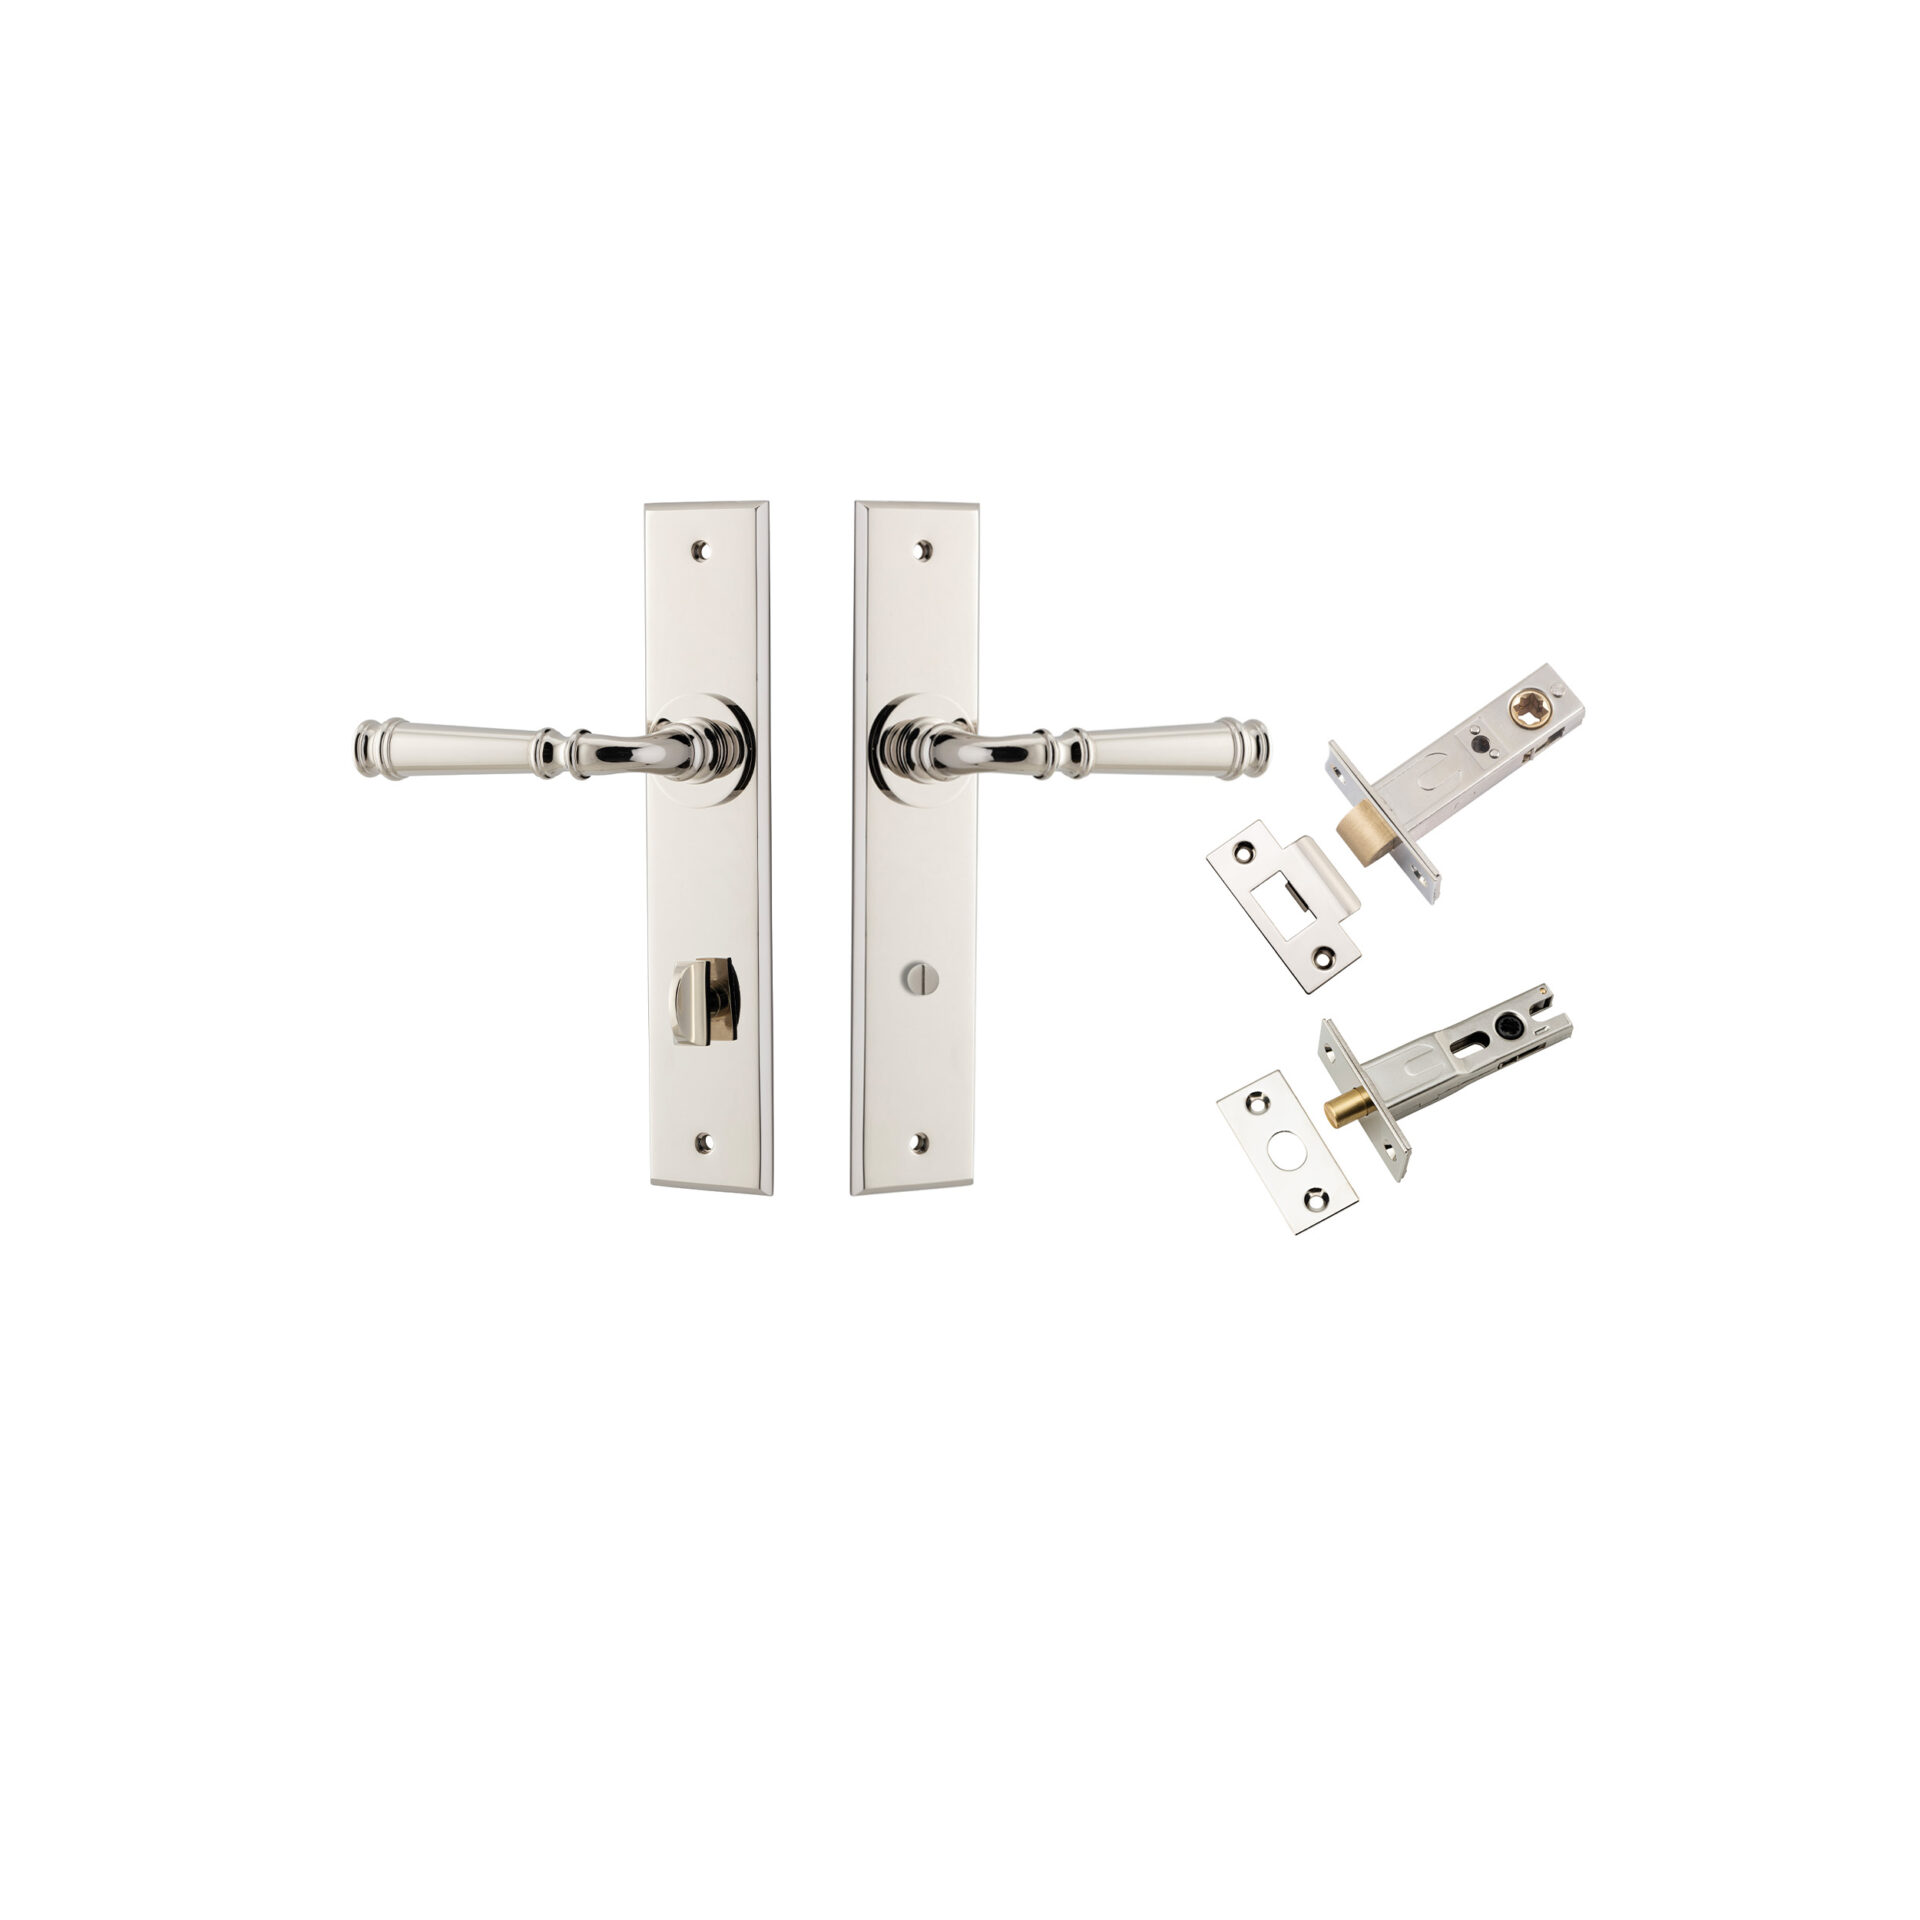 14286KPRIV60 - Verona Lever - Chamfered  Backplate Privacy Kit with Privacy Turn - Polished Nickel - Privacy